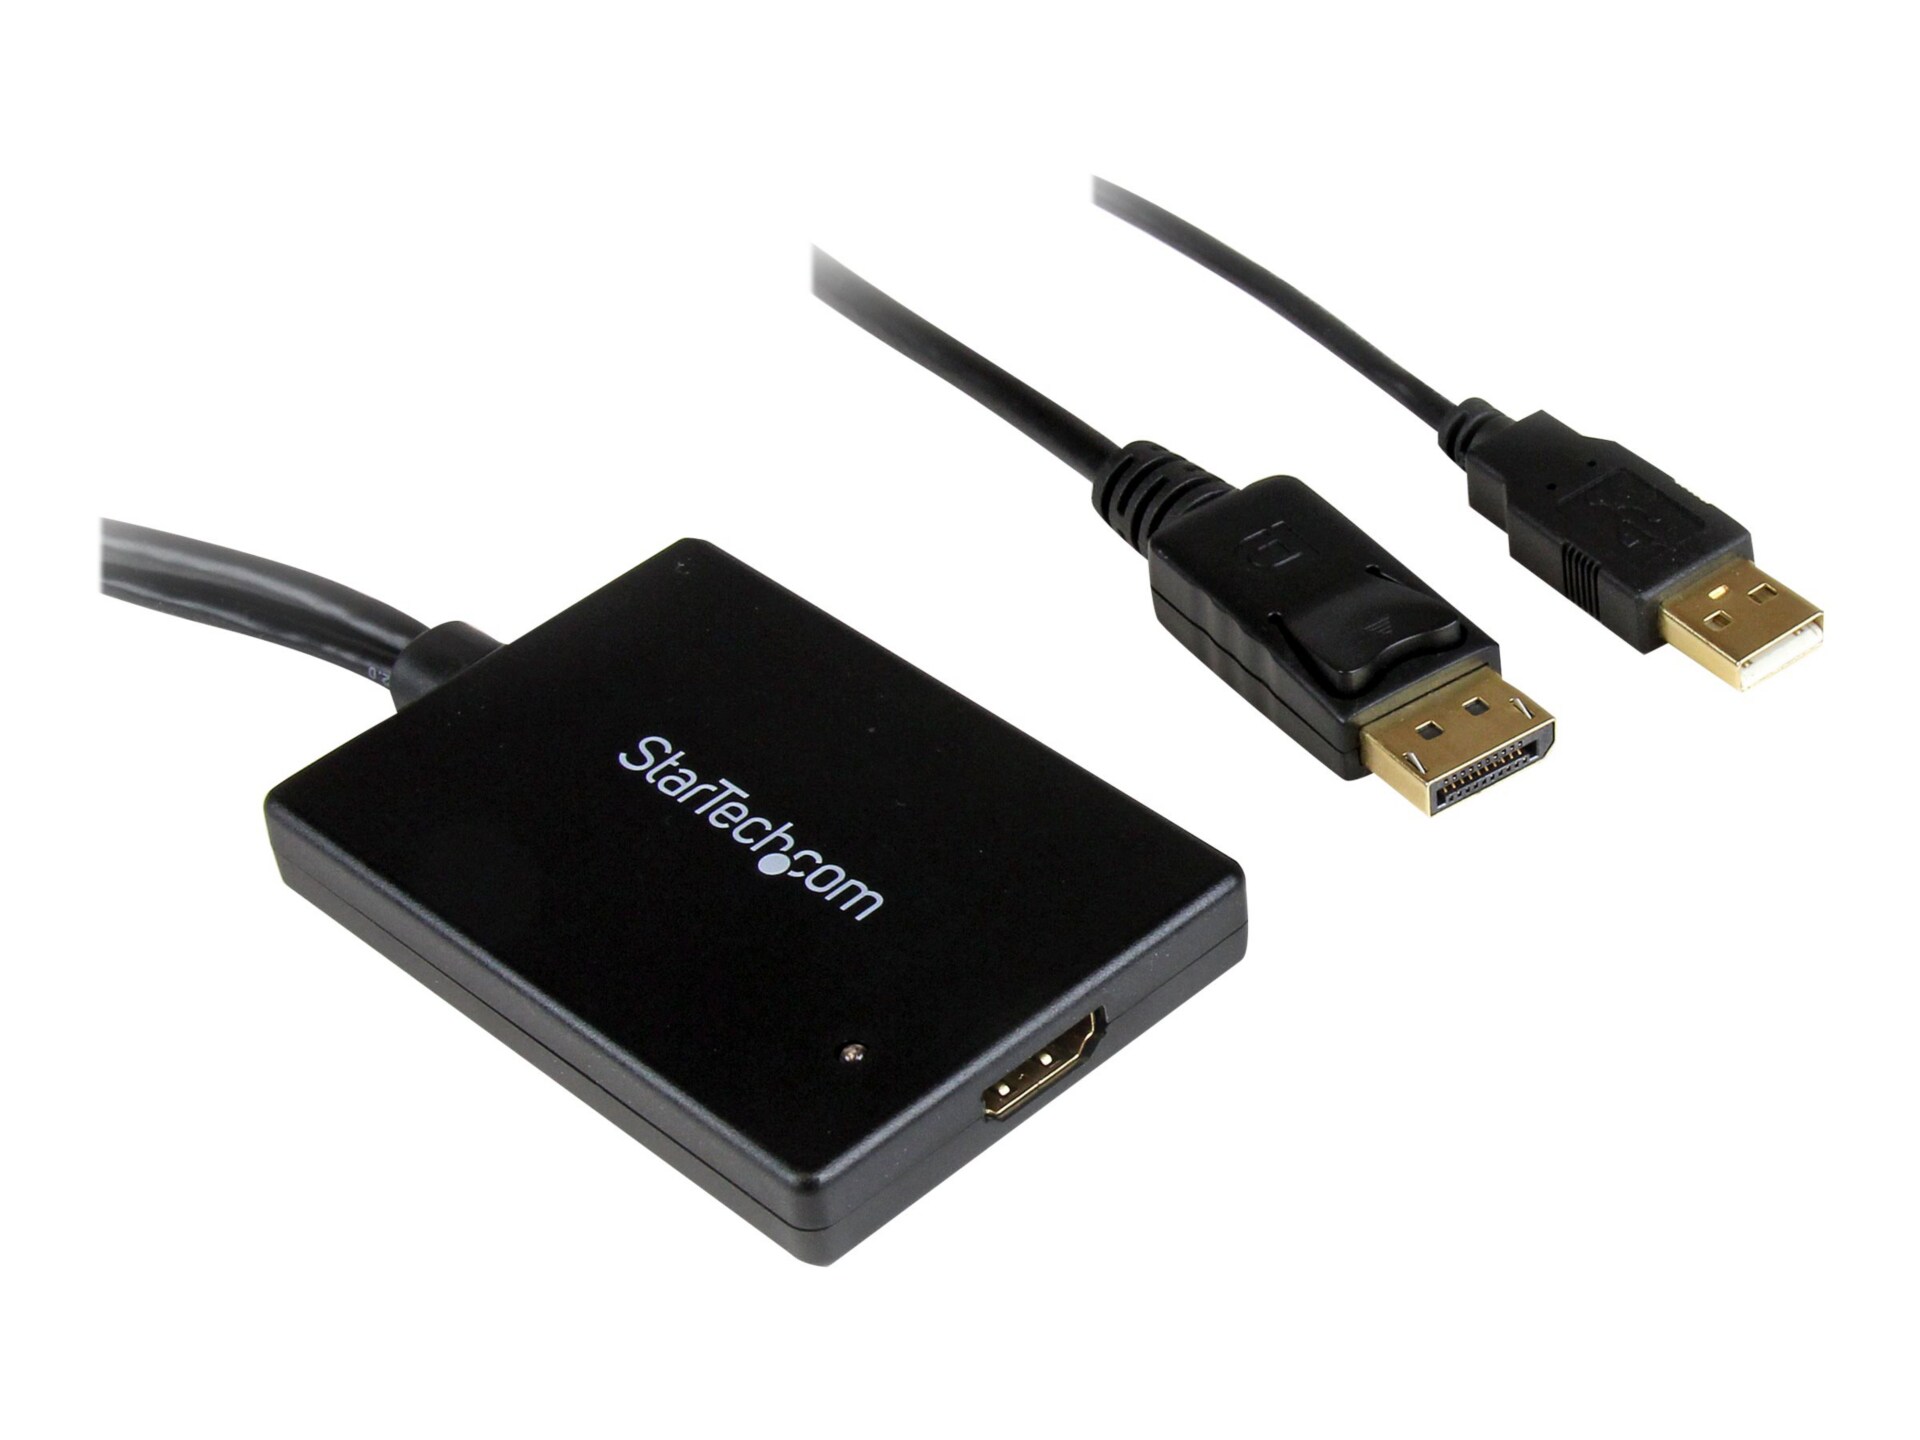 StarTech.com DisplayPort to HDMI Adapter with USB Audio - DP to HDMI